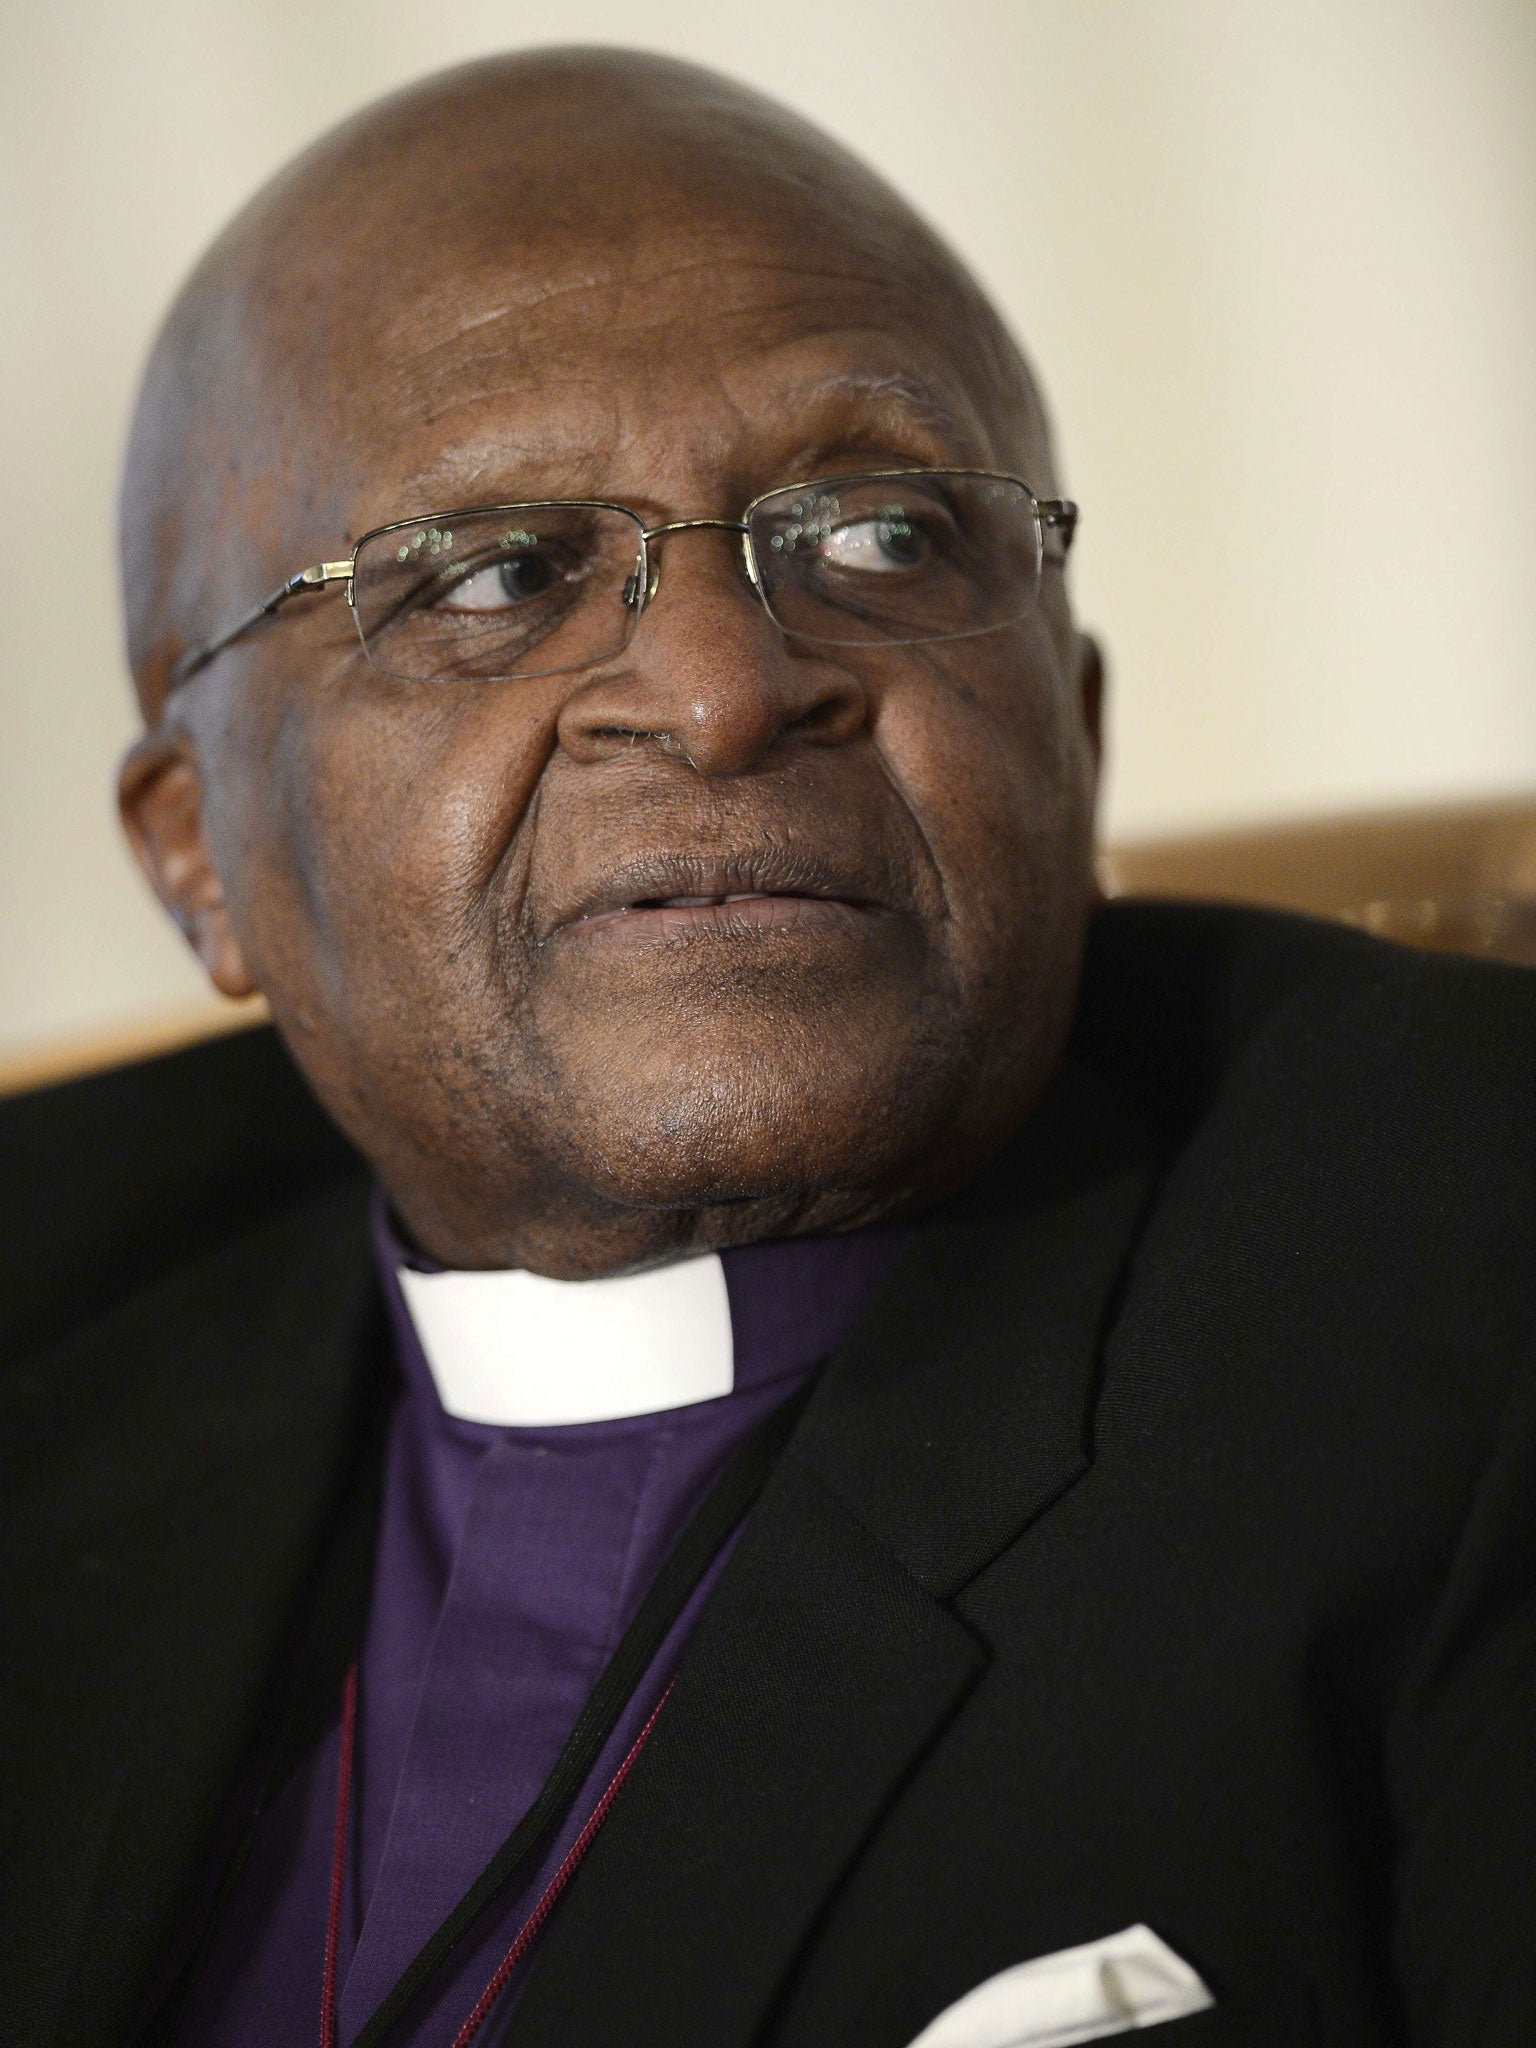 Desmond Tutu has said he will no longer vote for the ruling African National Congress